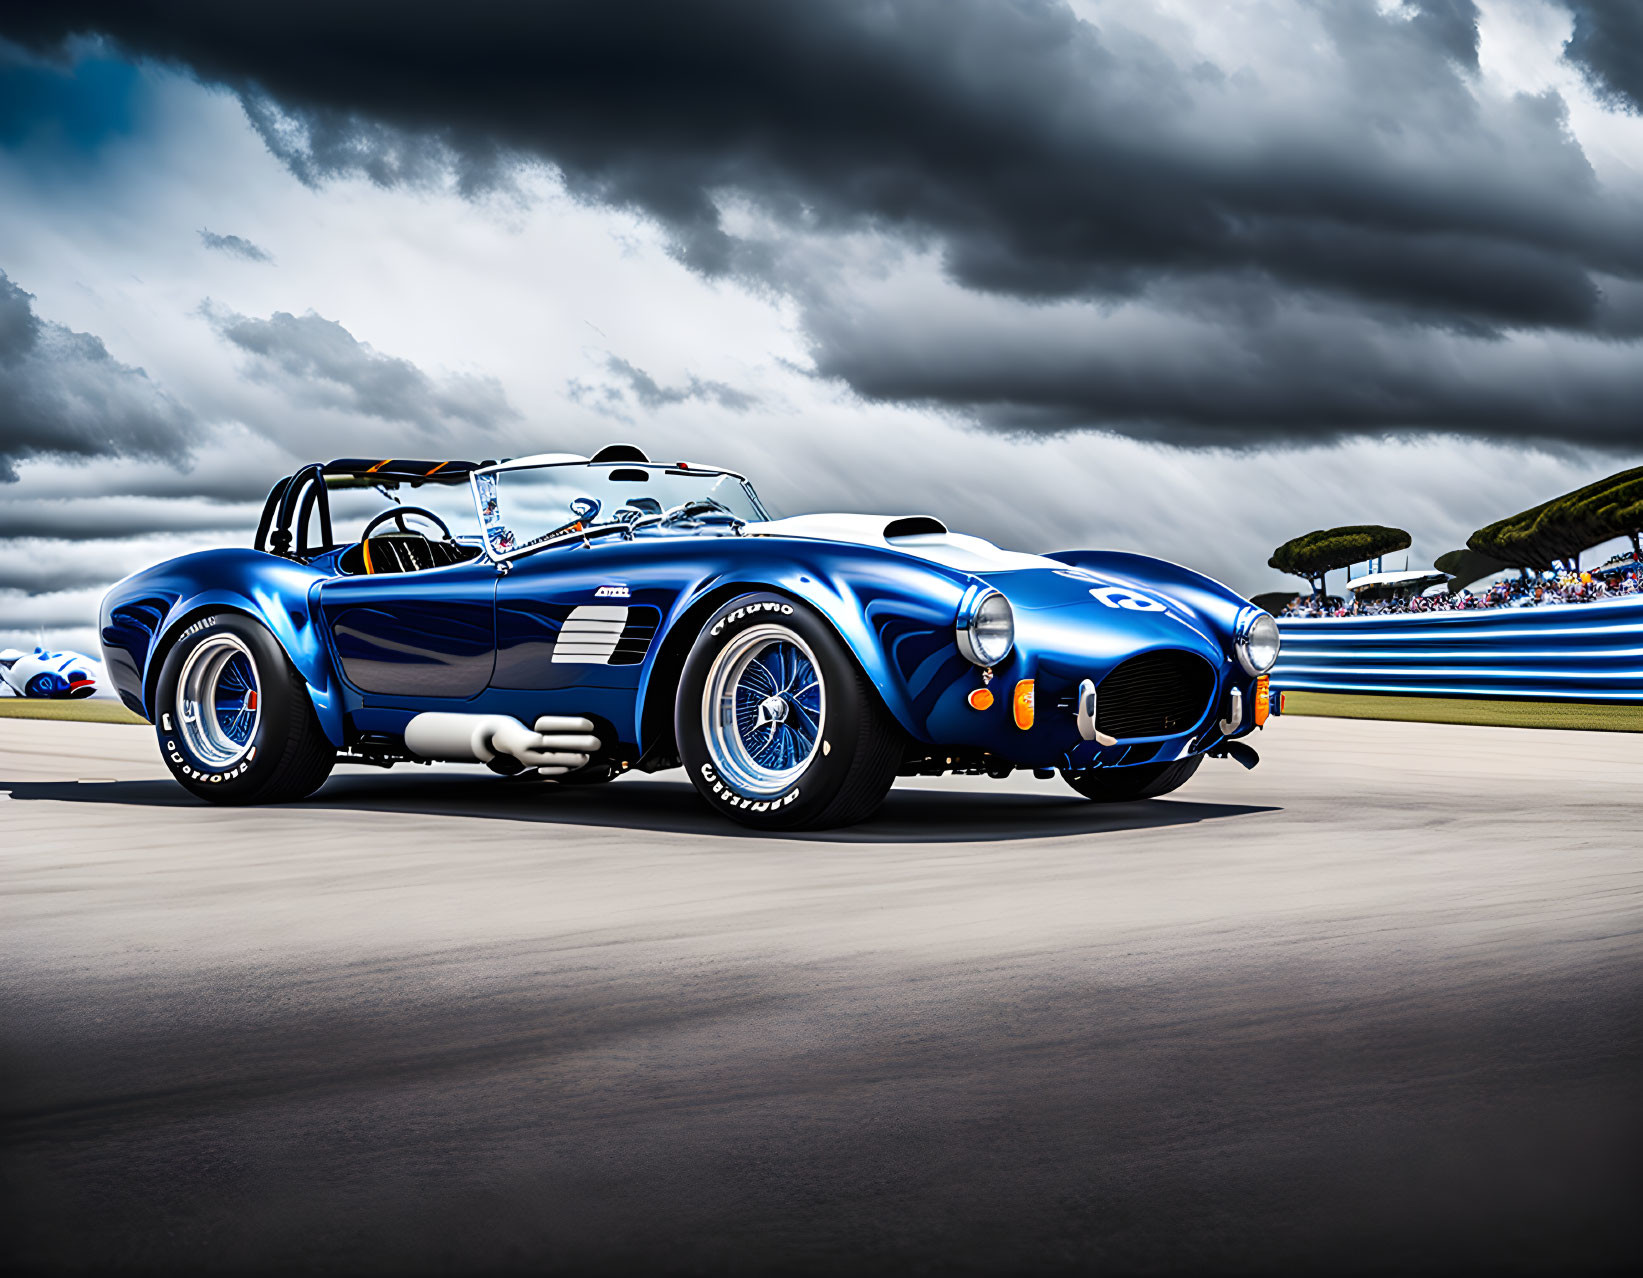 Vintage blue sports car with white racing stripes, chrome accents, and wire wheels under dramatic sky